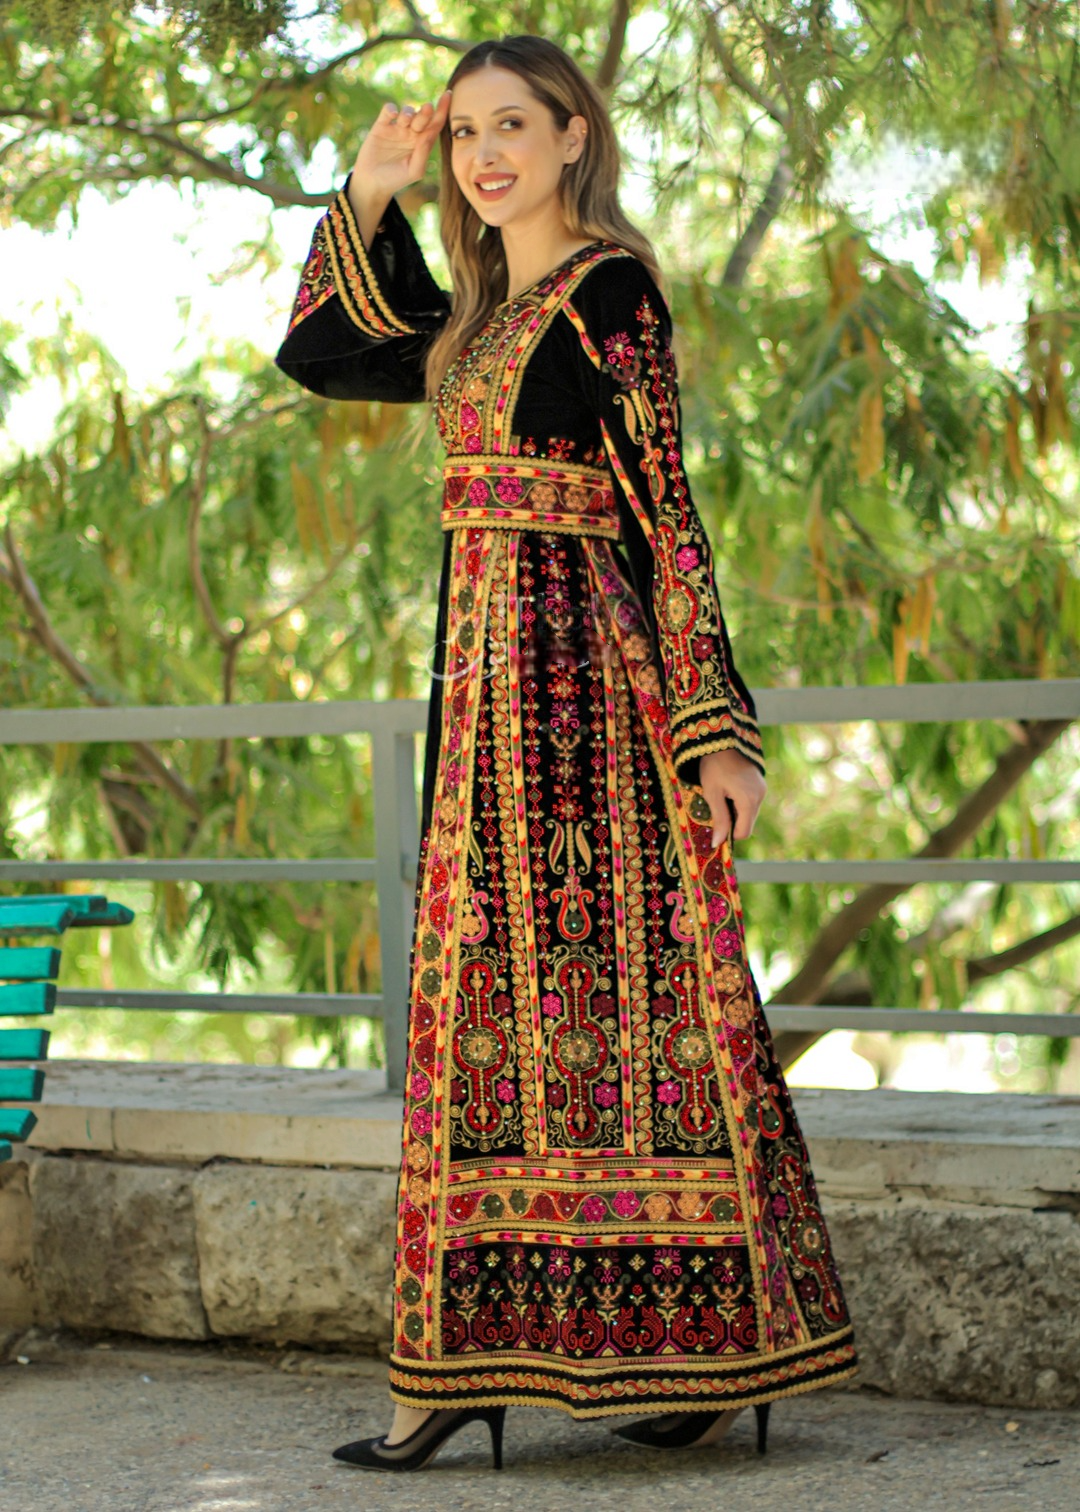 Black & Mix Velvet - Very High Quality Embroidered Palestinian style Thobe